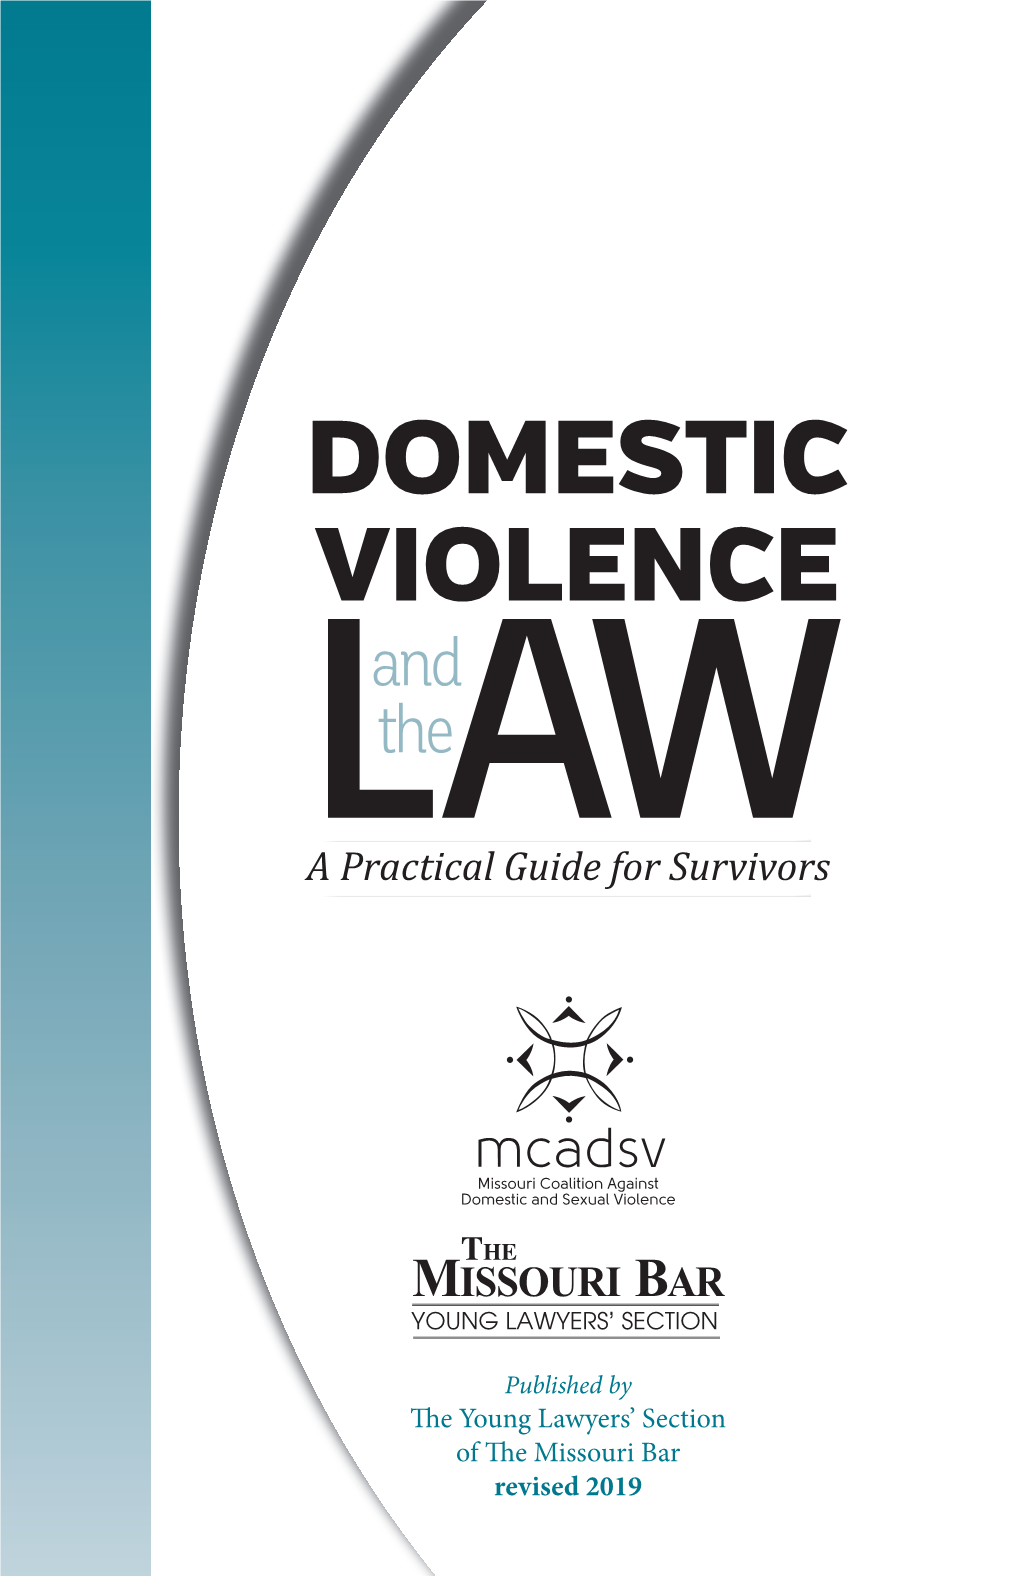 DOMESTIC VIOLENCE and Lawthe a Practical Guide for Survivors